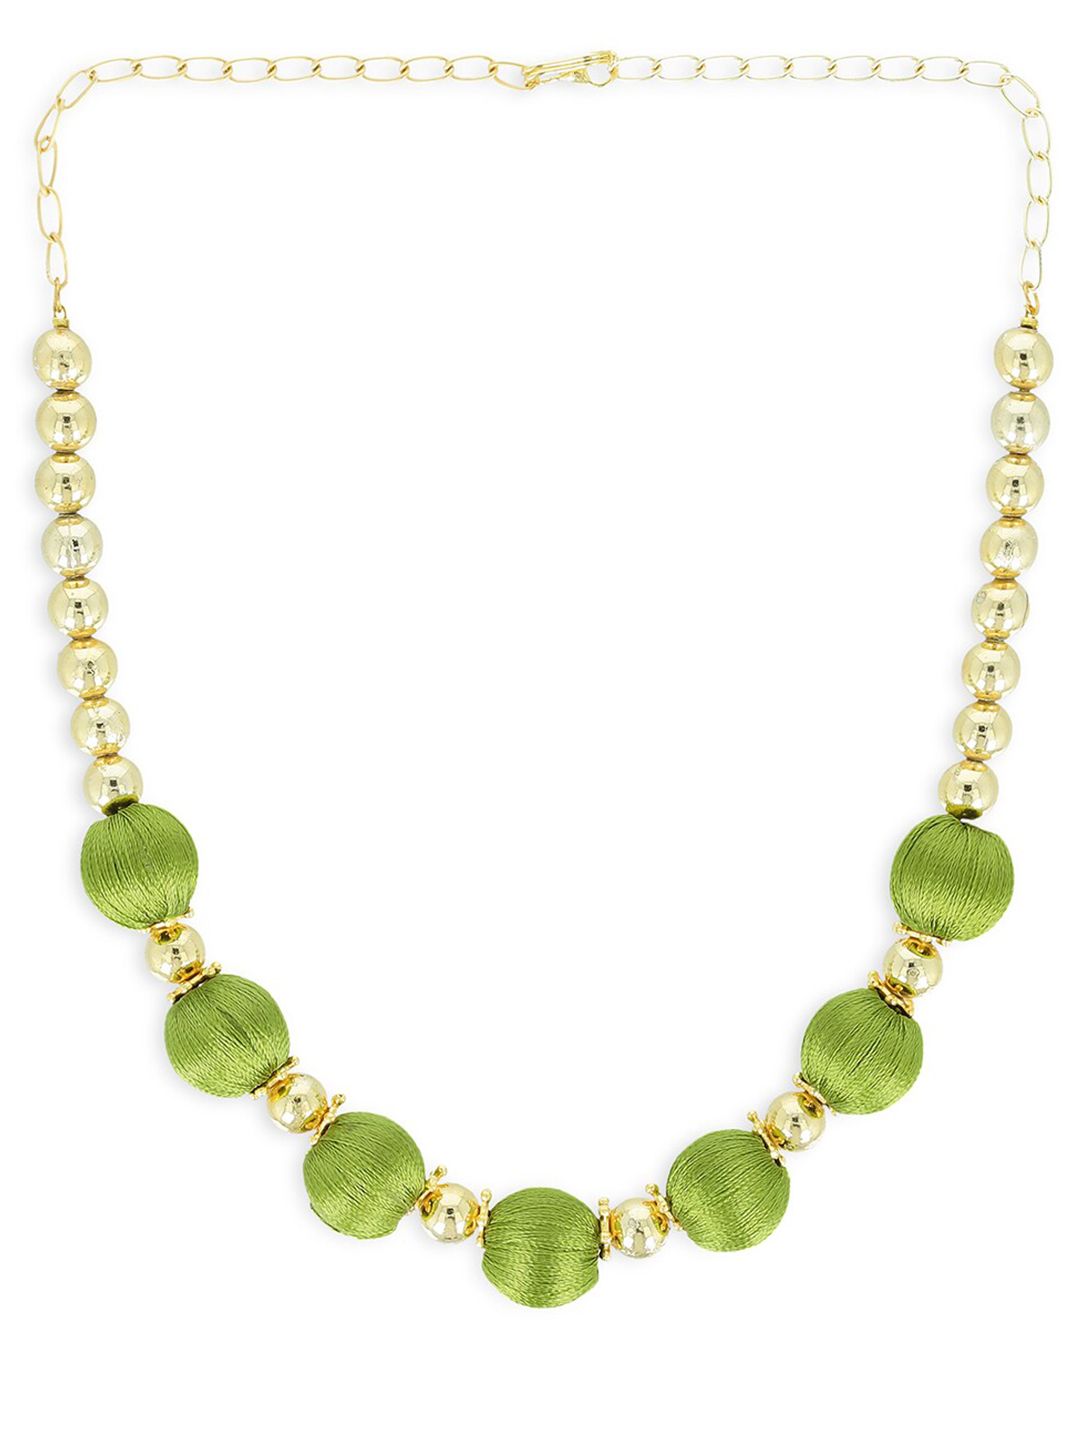 AKSHARA Green & Gold-Toned Choker Necklace Price in India